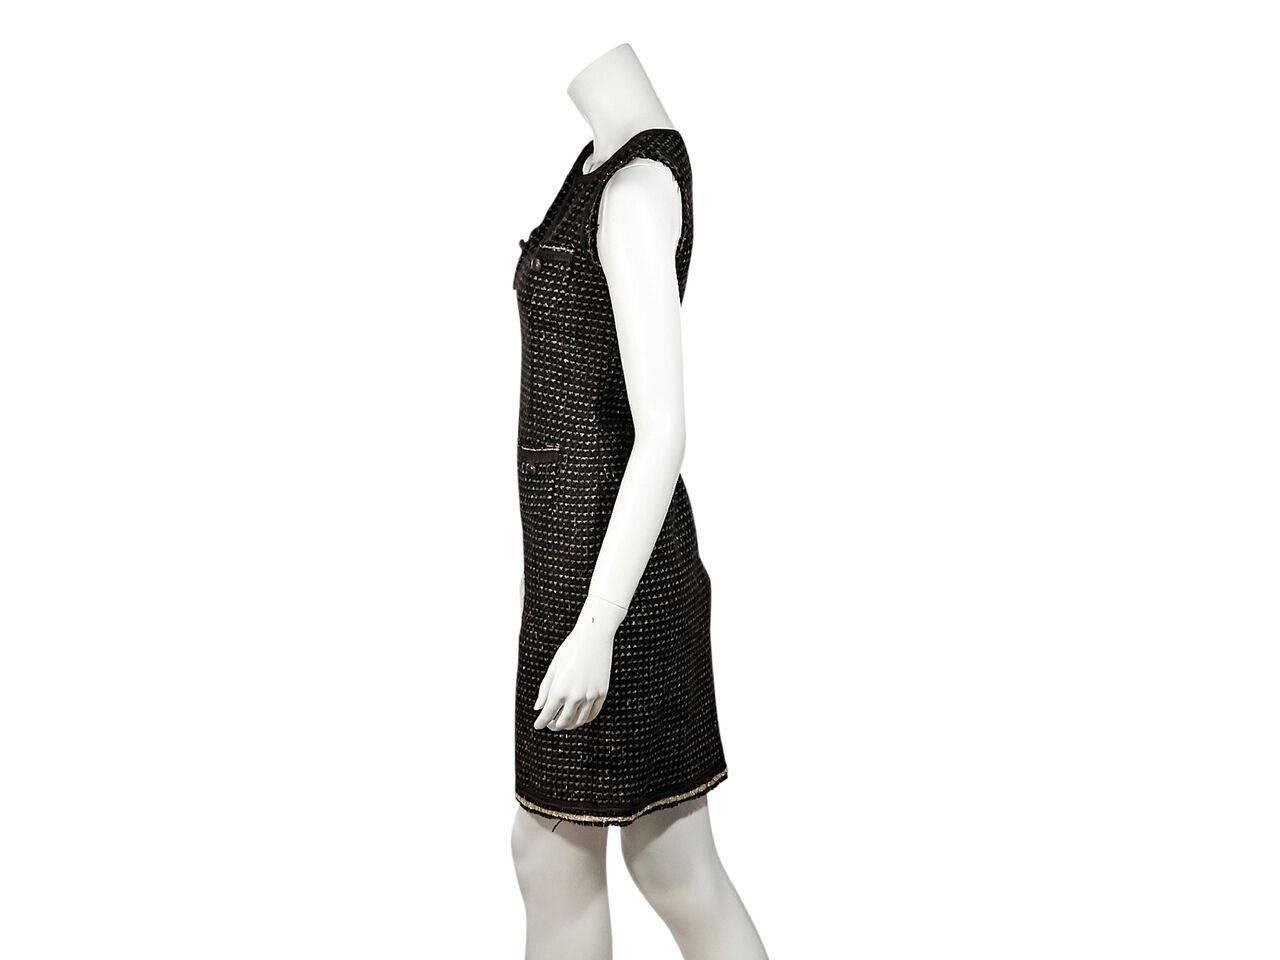 Product details:  Brown tweed sheath dress by Moschino.  Split scoopneck.  Sleeveless.  Front patch pockets.  Concealed zip closure.  
Condition: Pre-owned. Very good.
Est. Retail $ 728.00